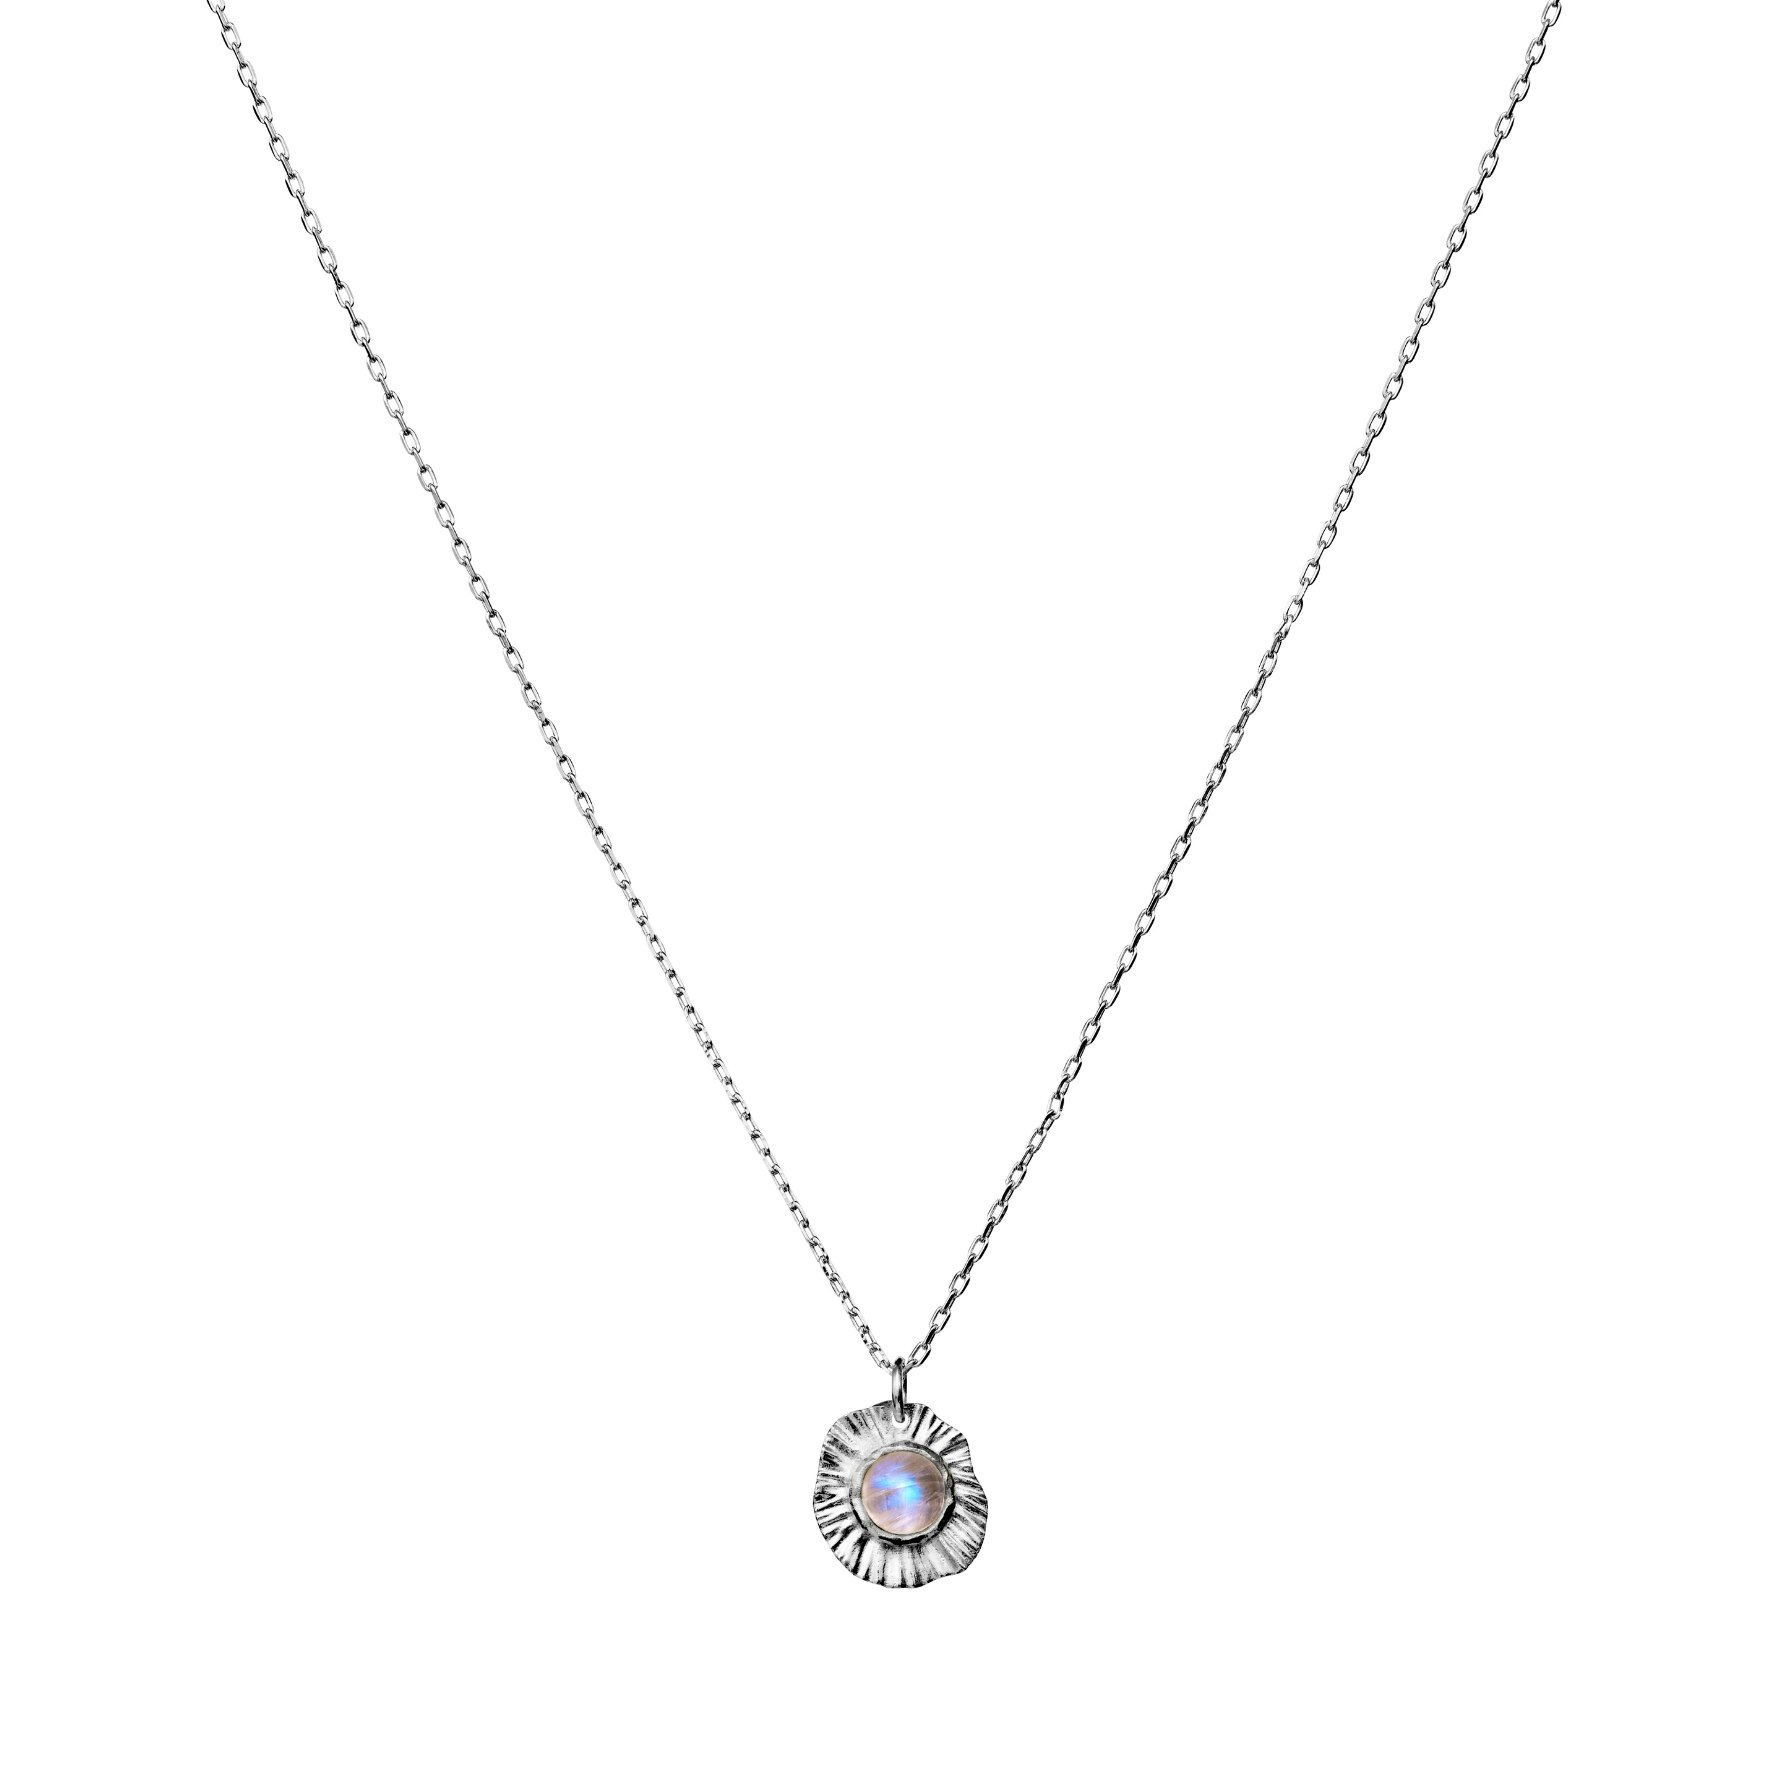 Astra Necklace from Maanesten in Silver Sterling 925